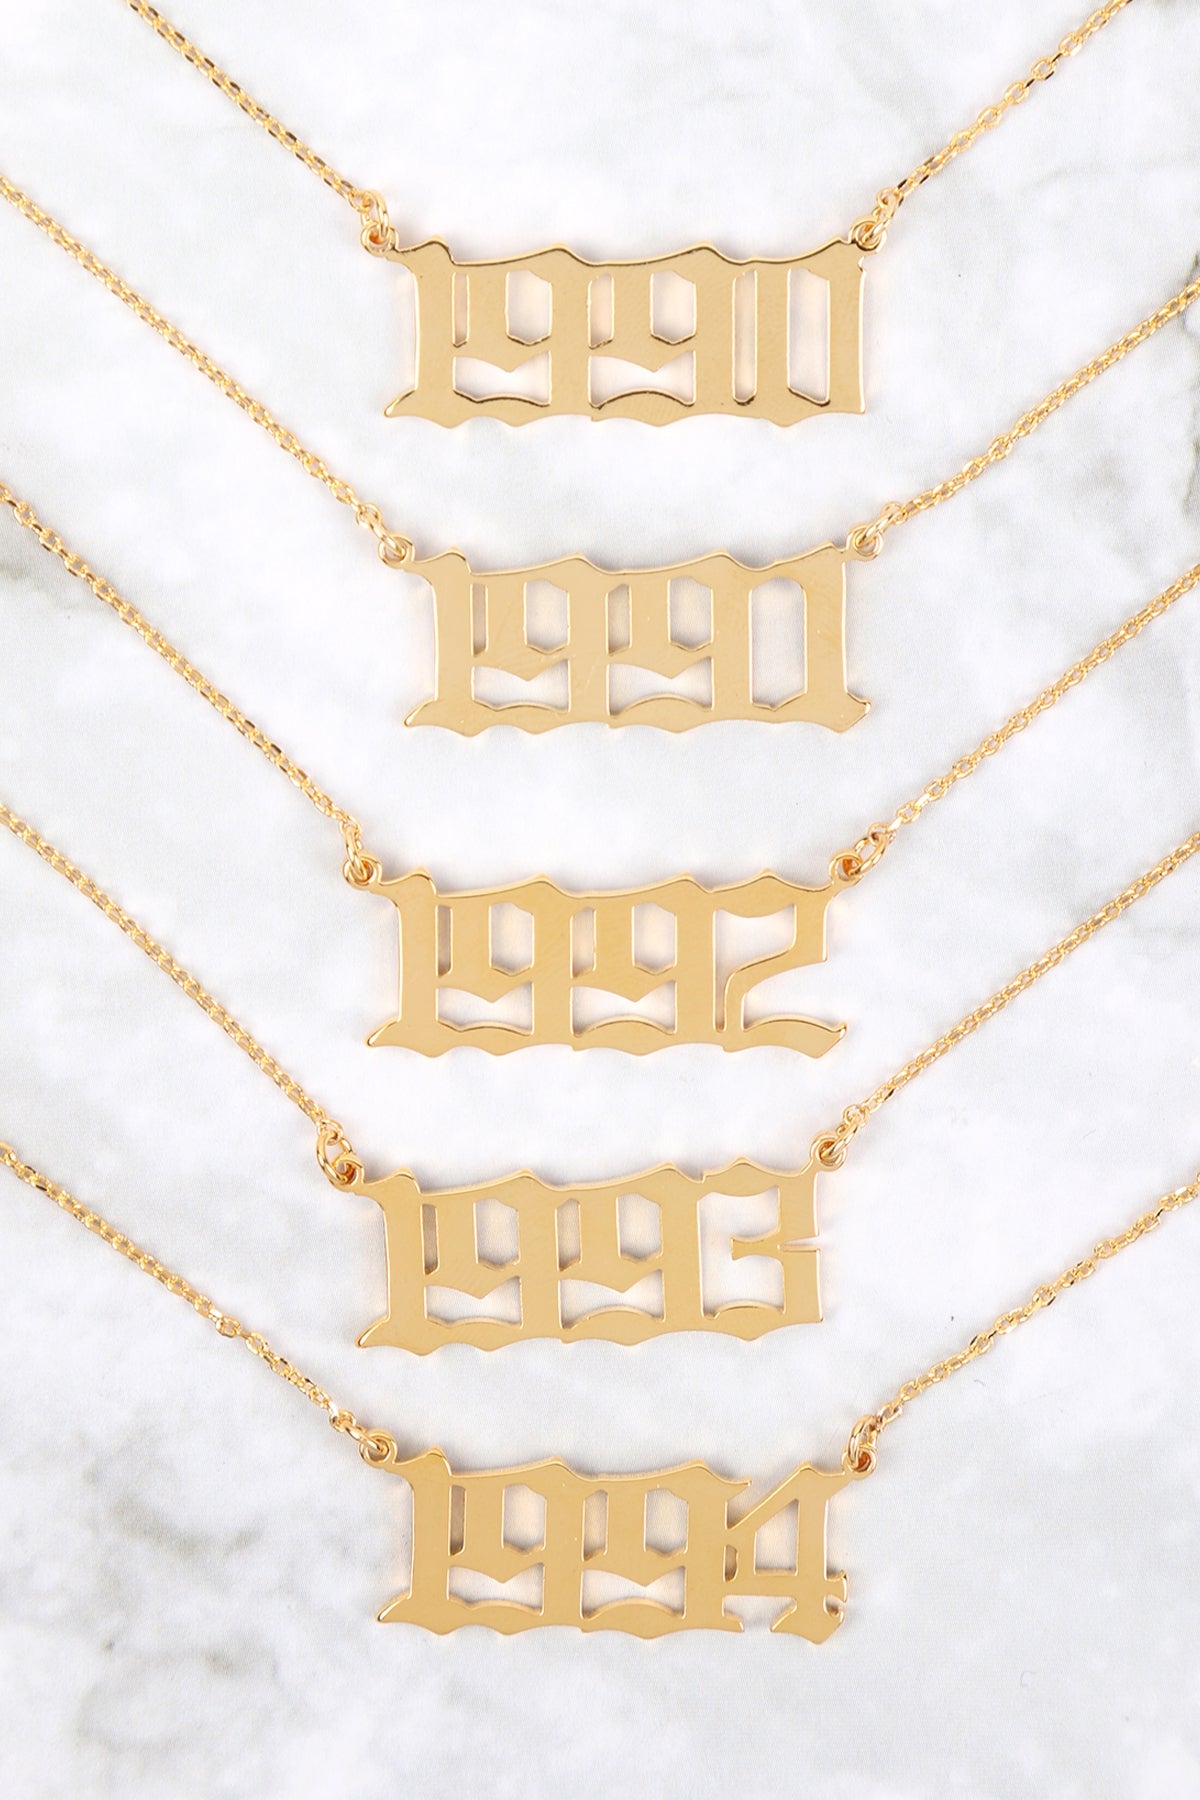 "1994" BIRTH YEAR PERSONALIZED NECKLACE